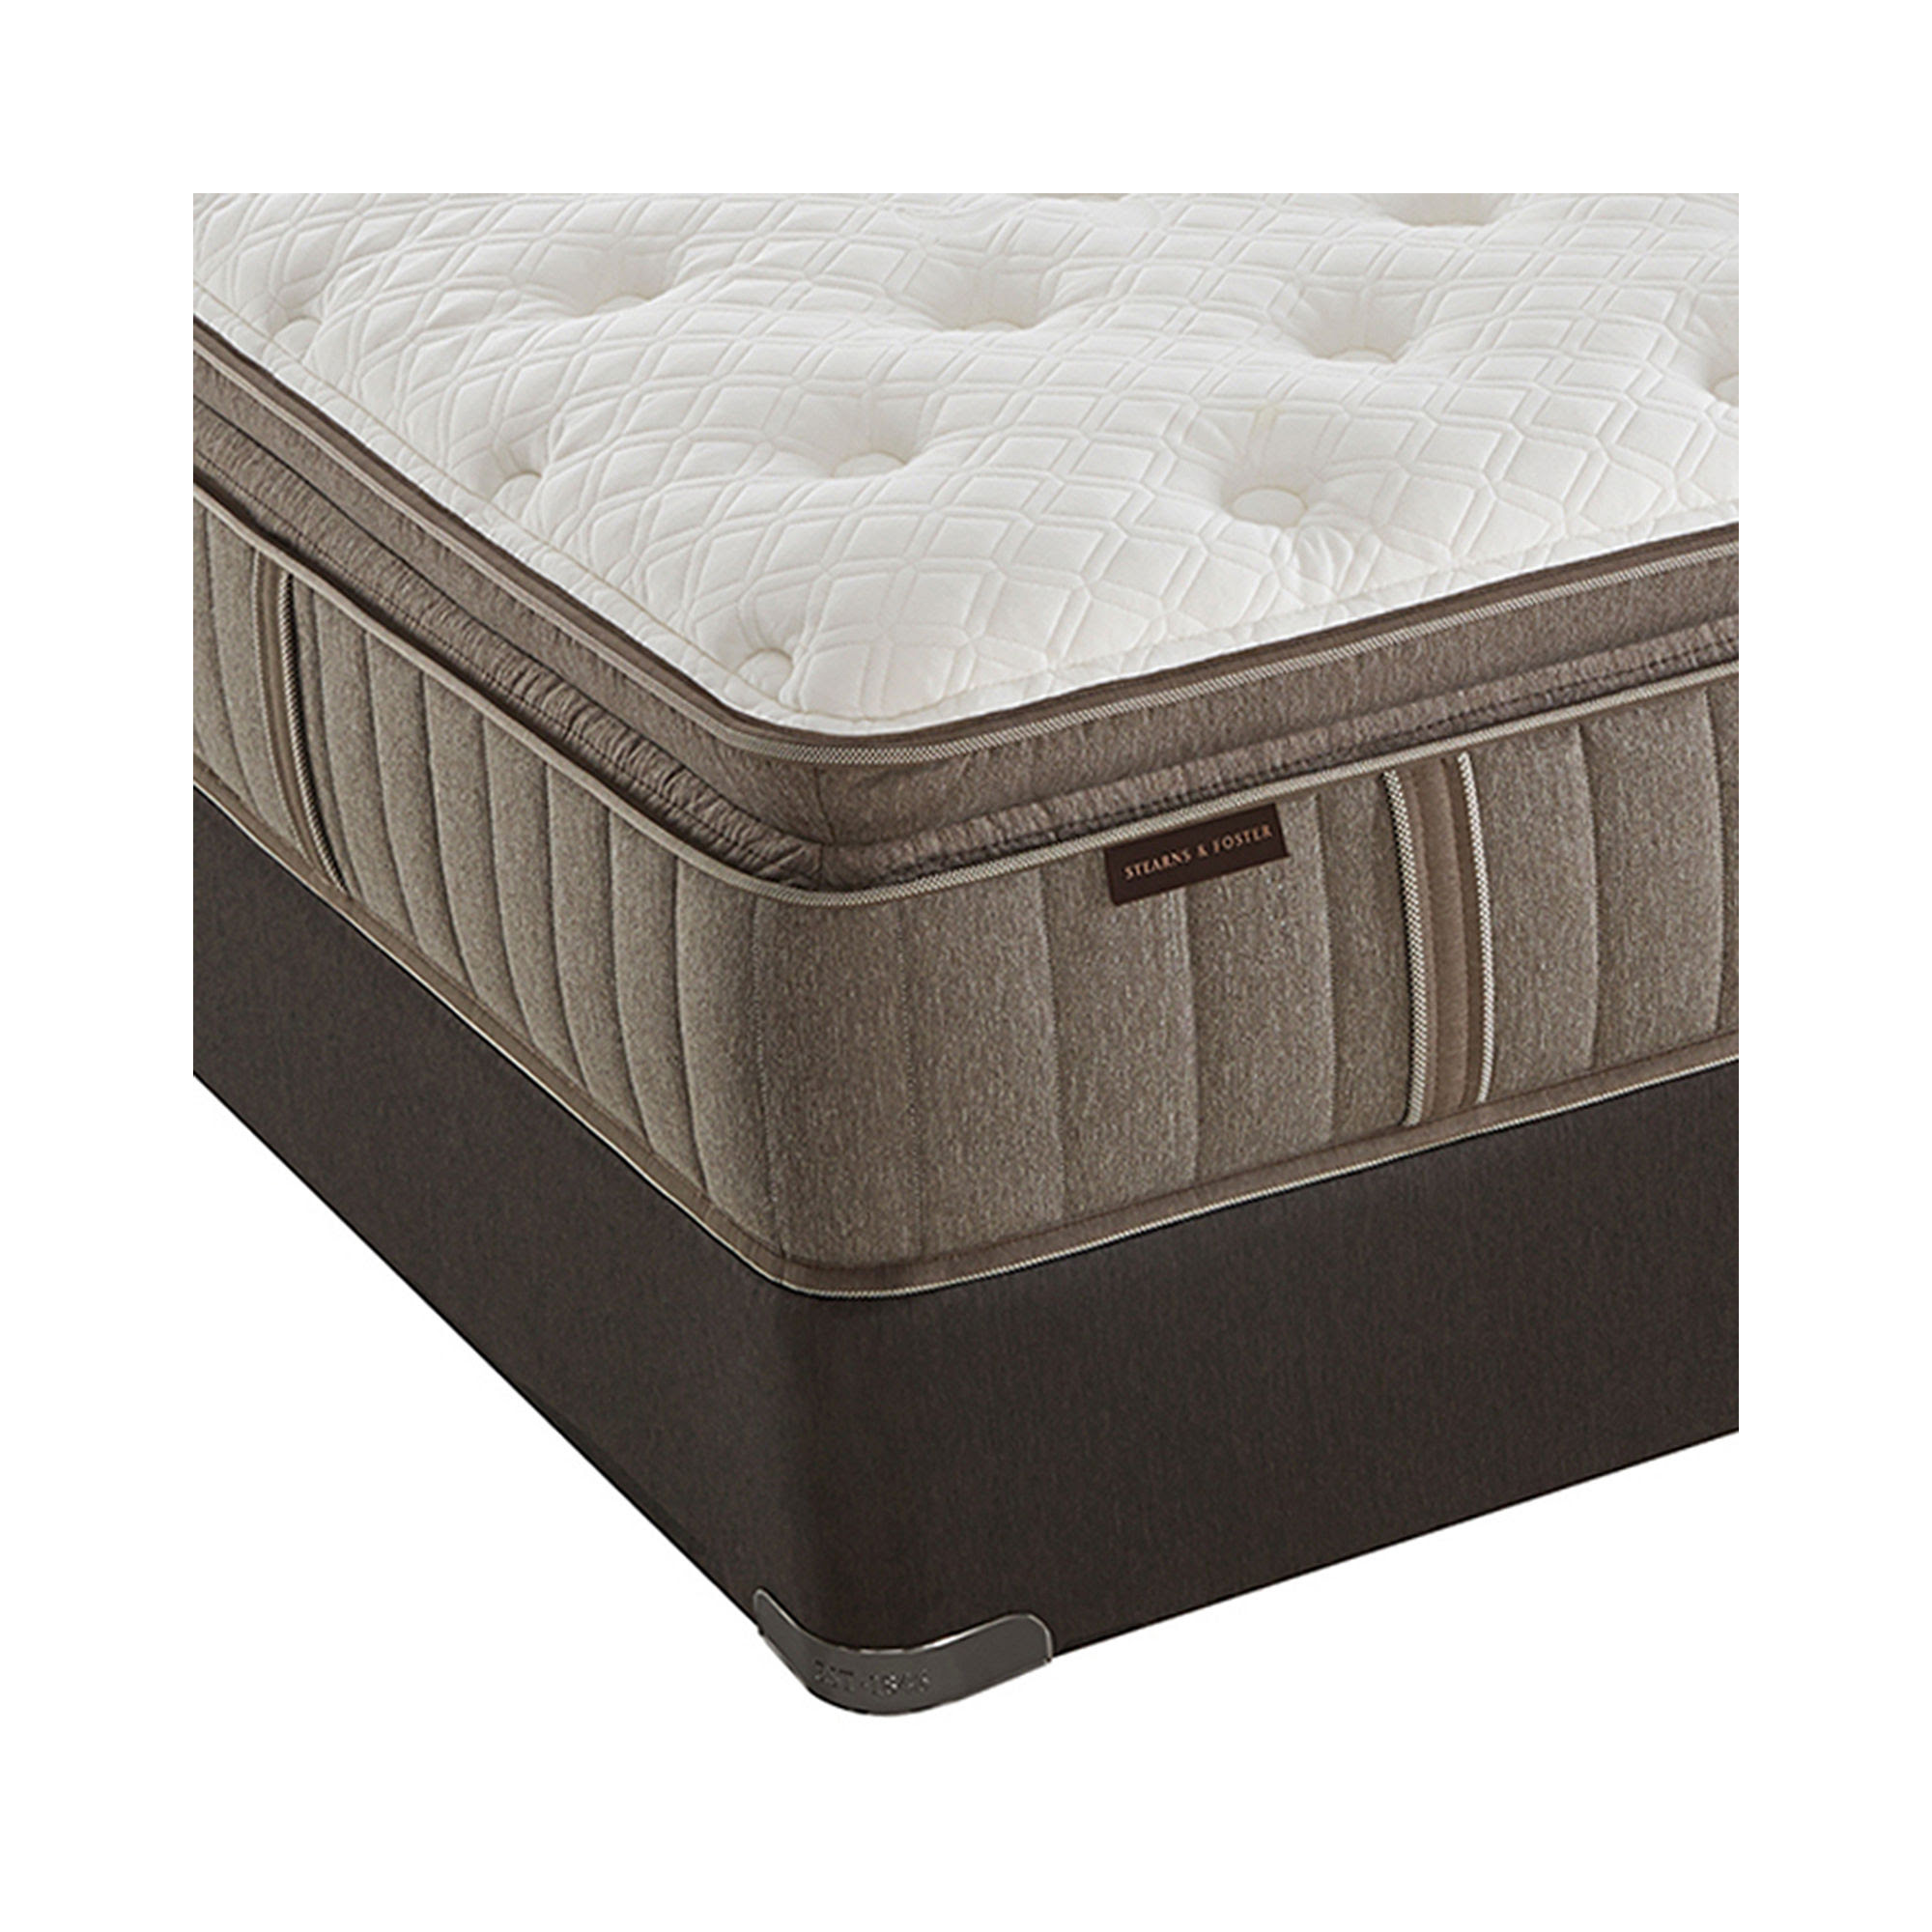 Cheap Offer Stearns and Foster Ella Grace Luxury Plush EPT - Mattress +
Box Spring Before Too Late